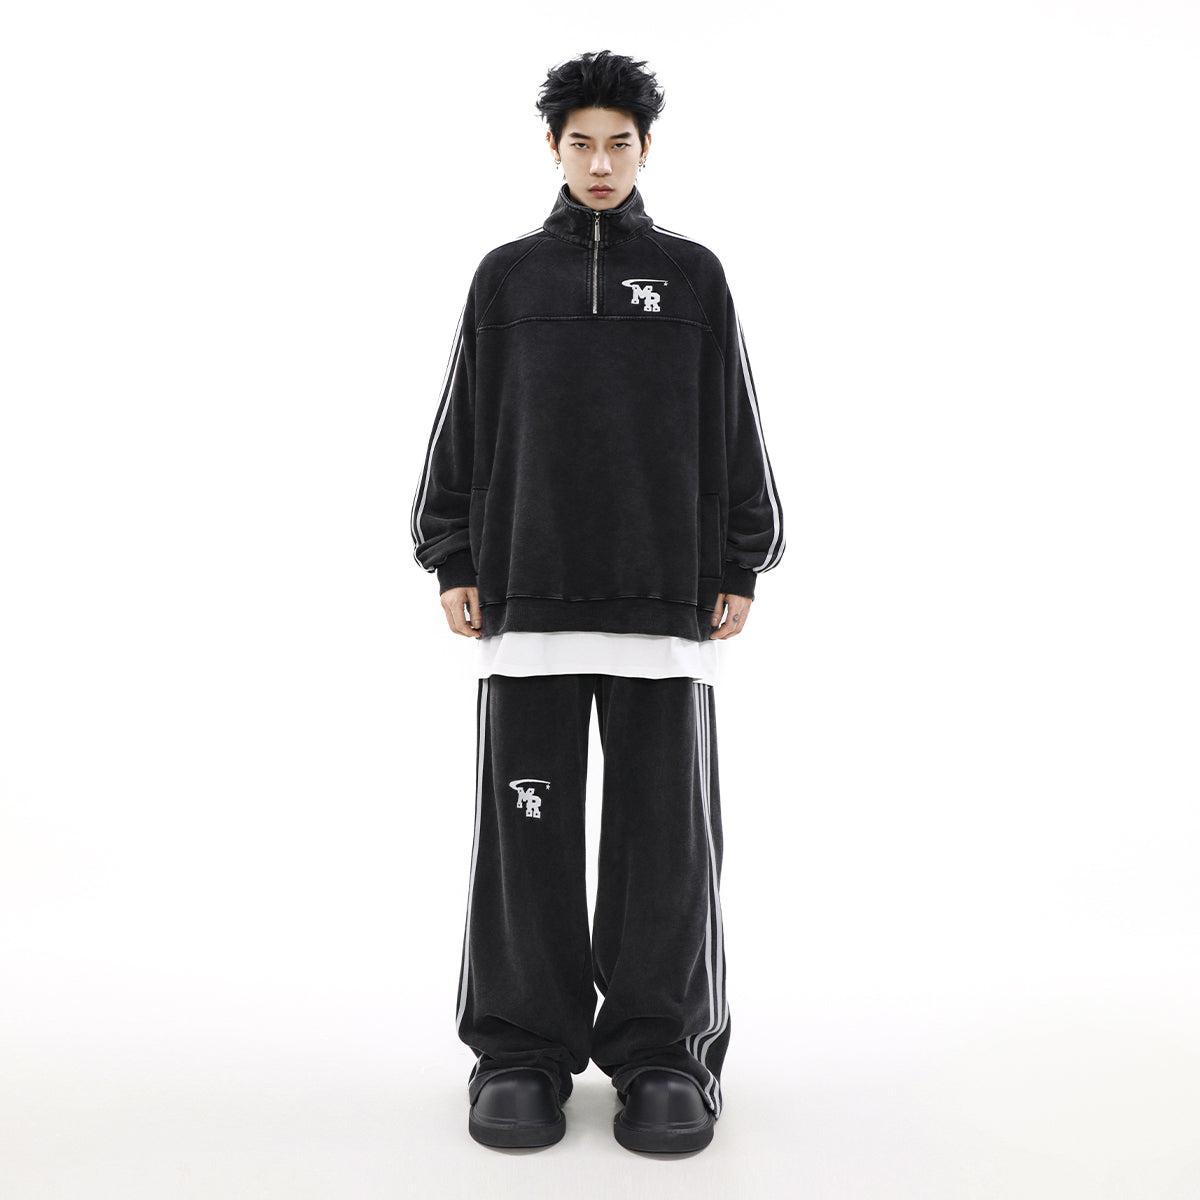 Mr Nearly Logo Embroidery Side Stripes Half-Zip & Sweatpants Korean Street Fashion Pants By Mr Nearly Shop Online at OH Vault